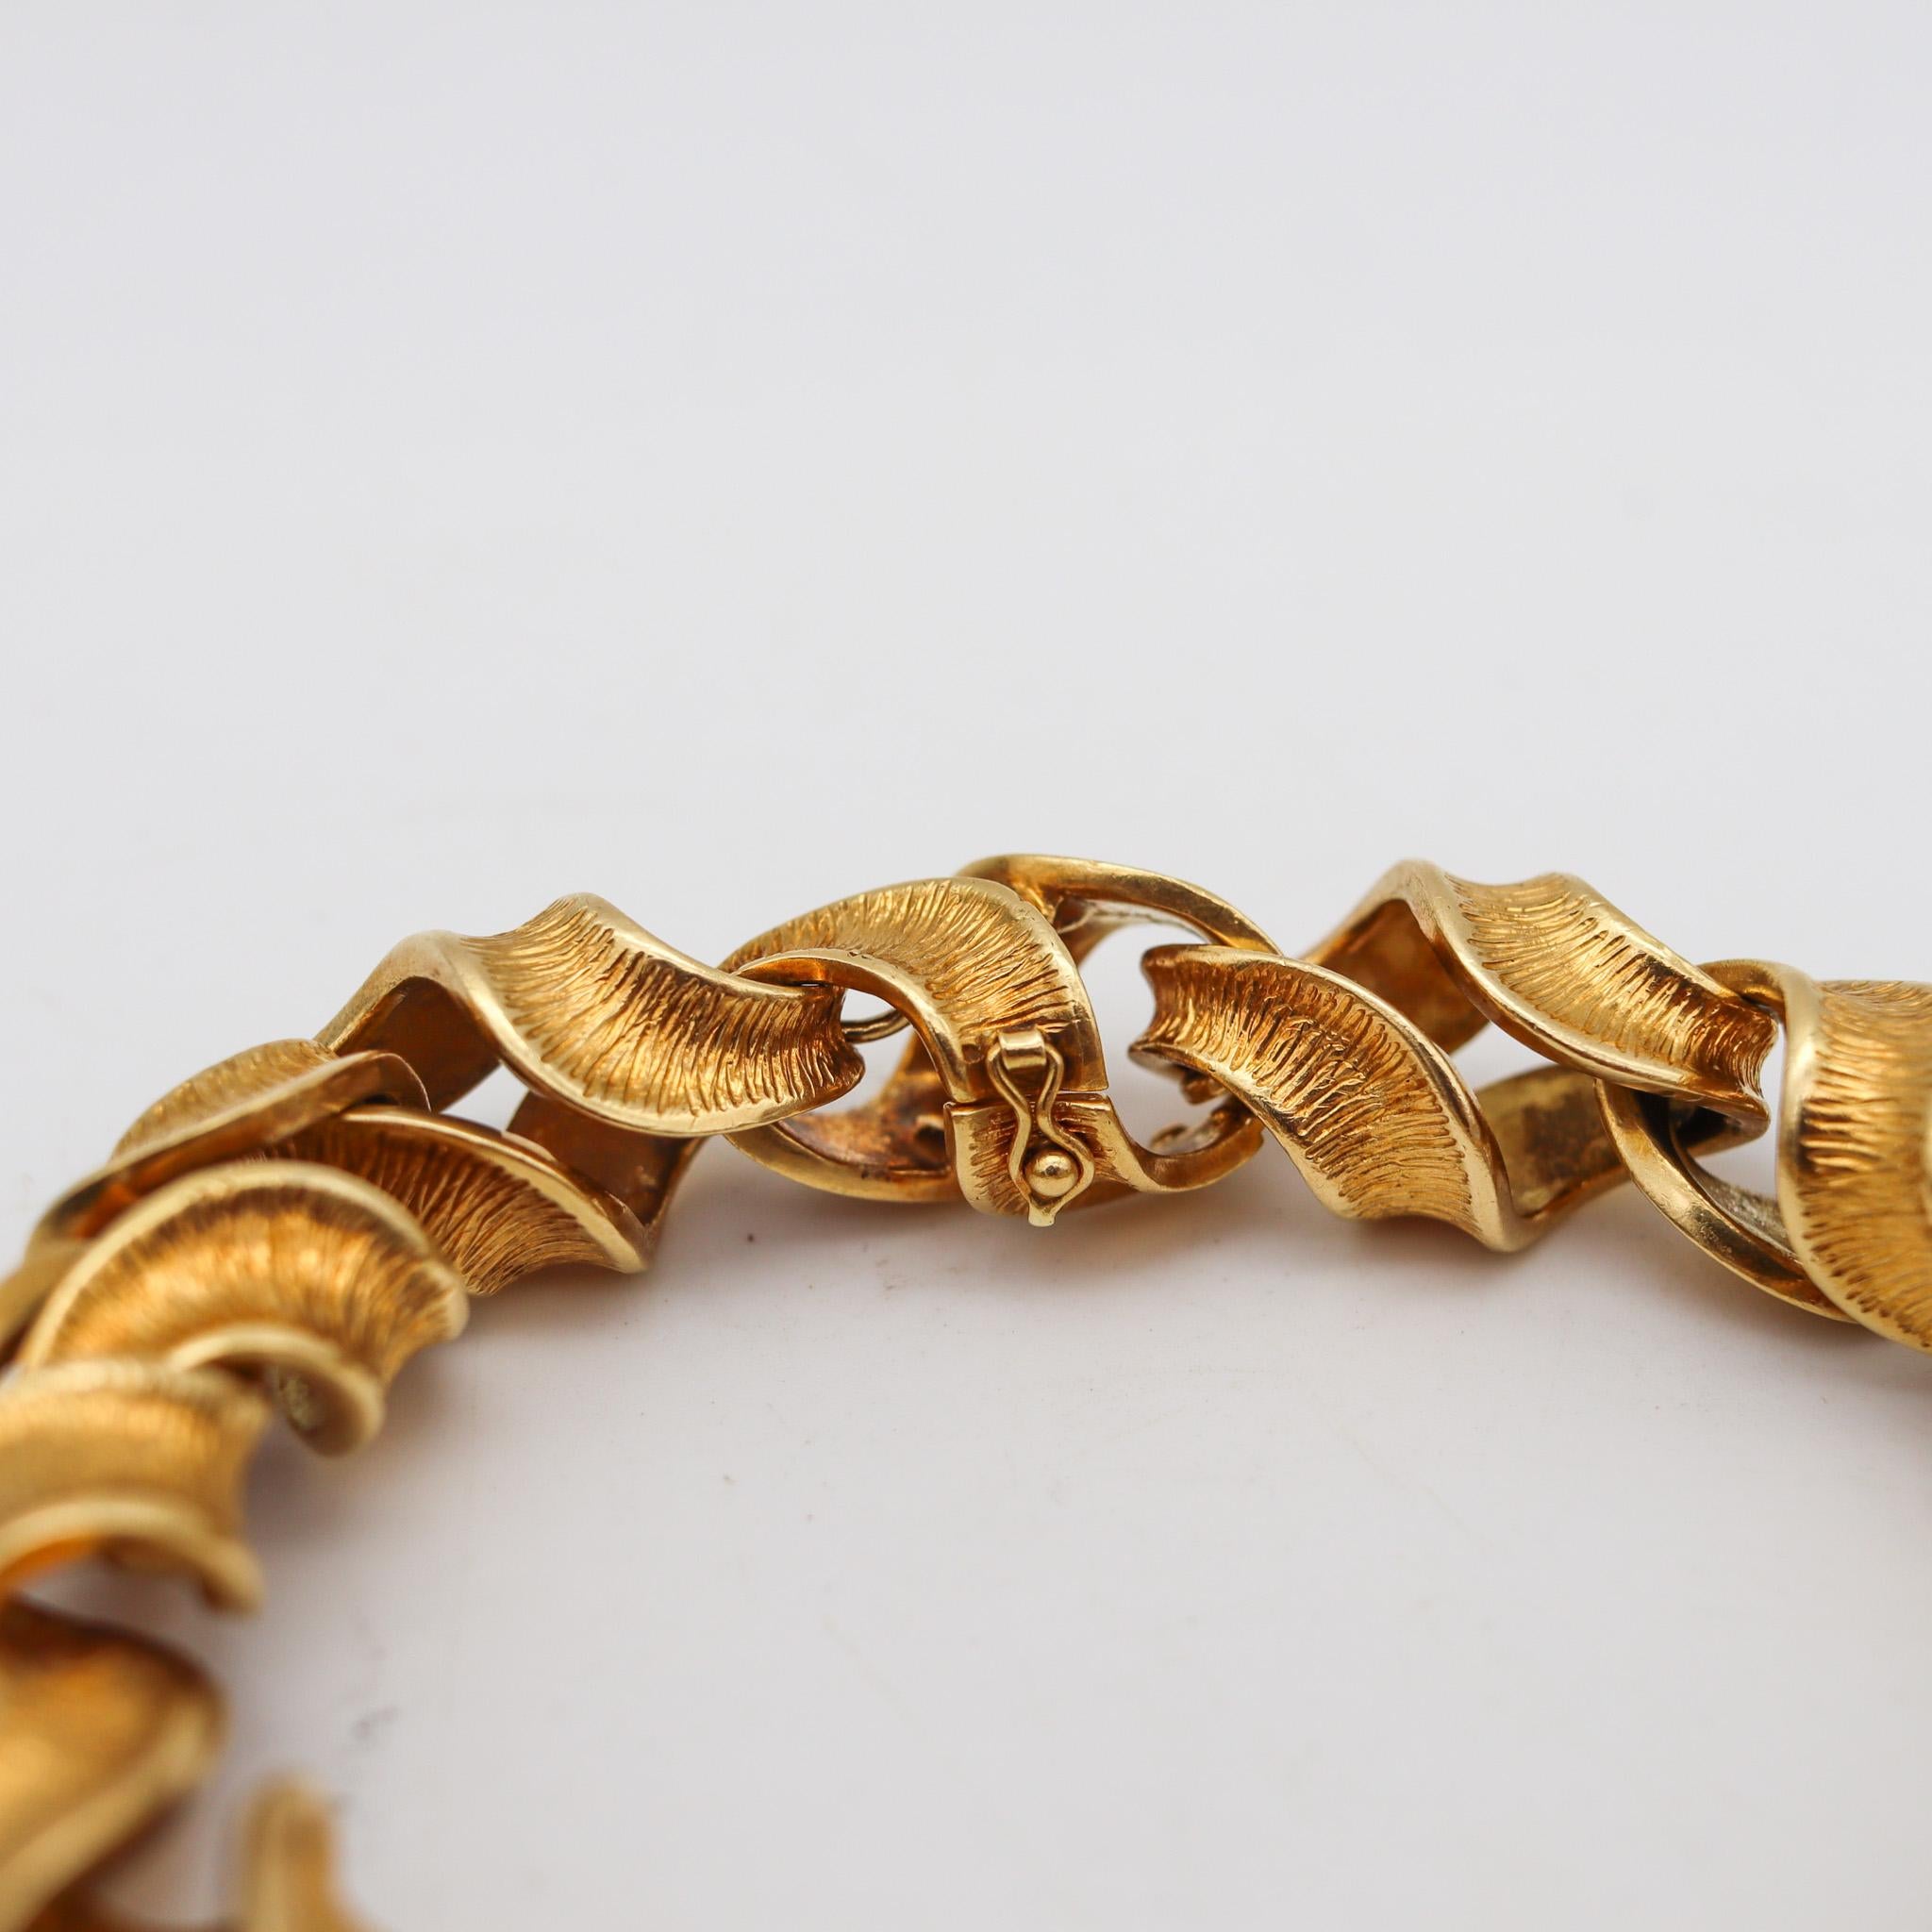 Women's or Men's Riccardo Masella 1960 Modernist Twisted Bracelet In Solid 18Kt Yellow Gold For Sale